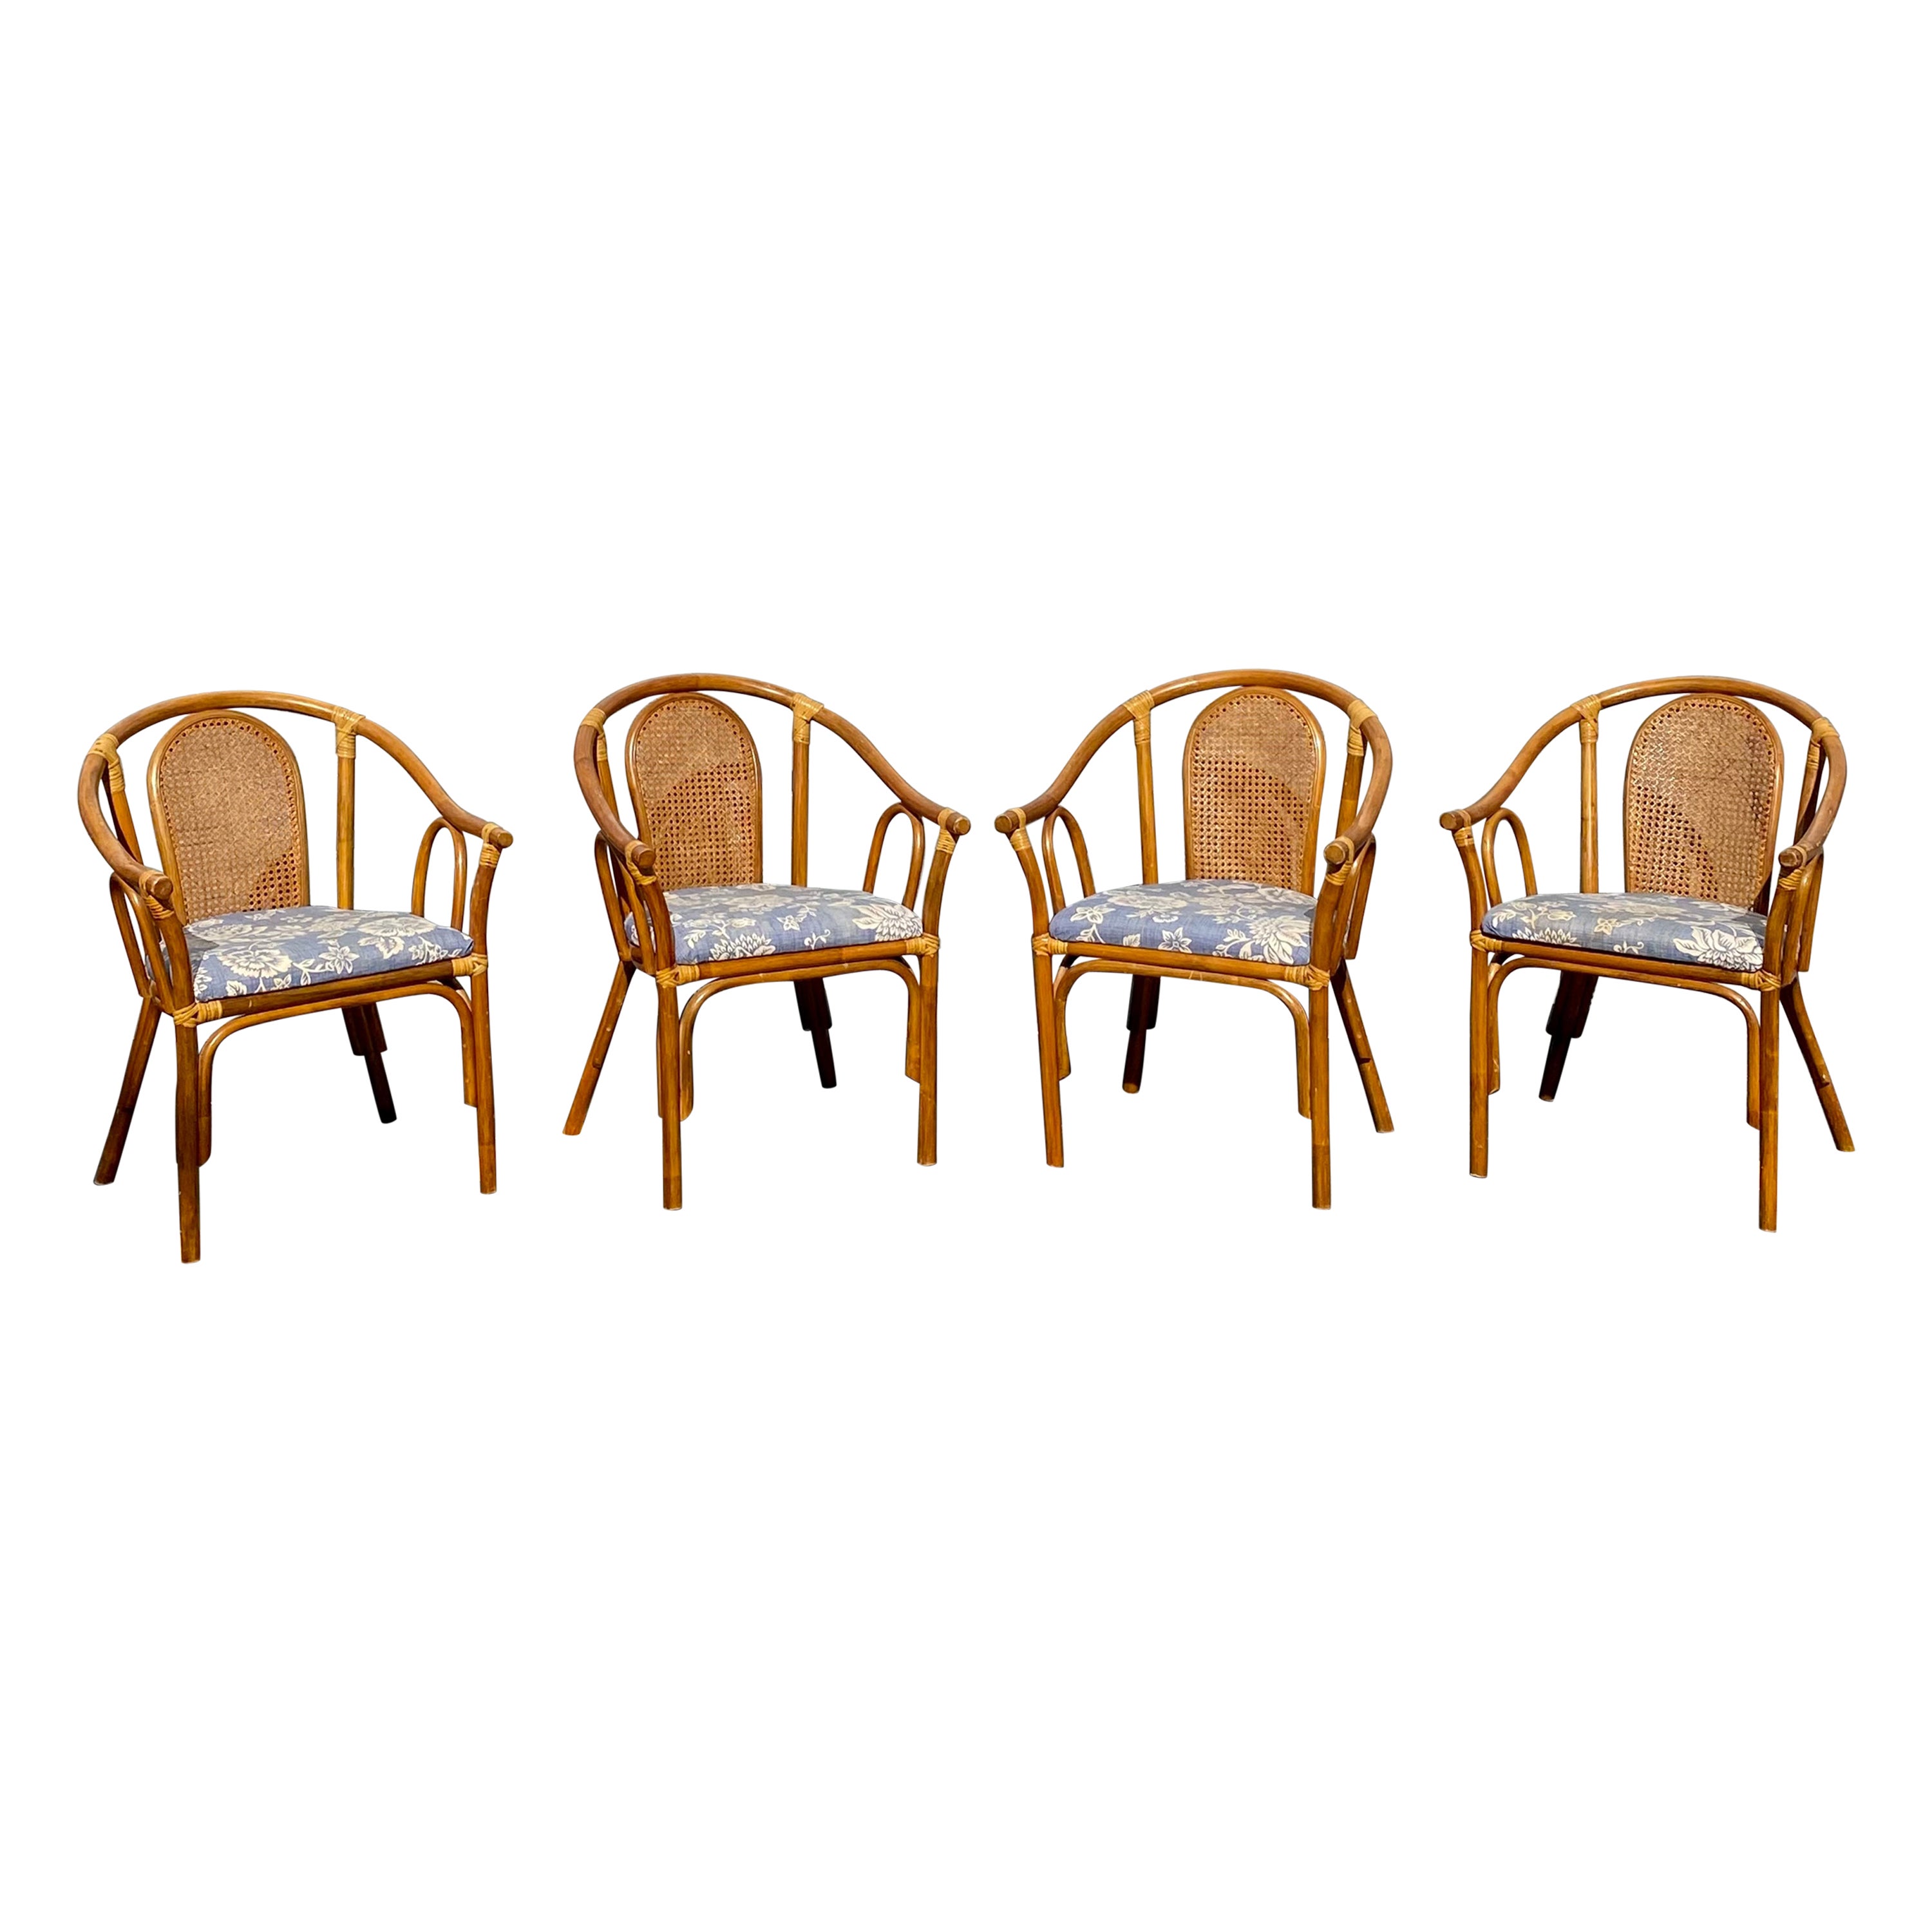 1970s Rattan Cane Barrel Blue and White Dining Chairs, Set of 5 For Sale